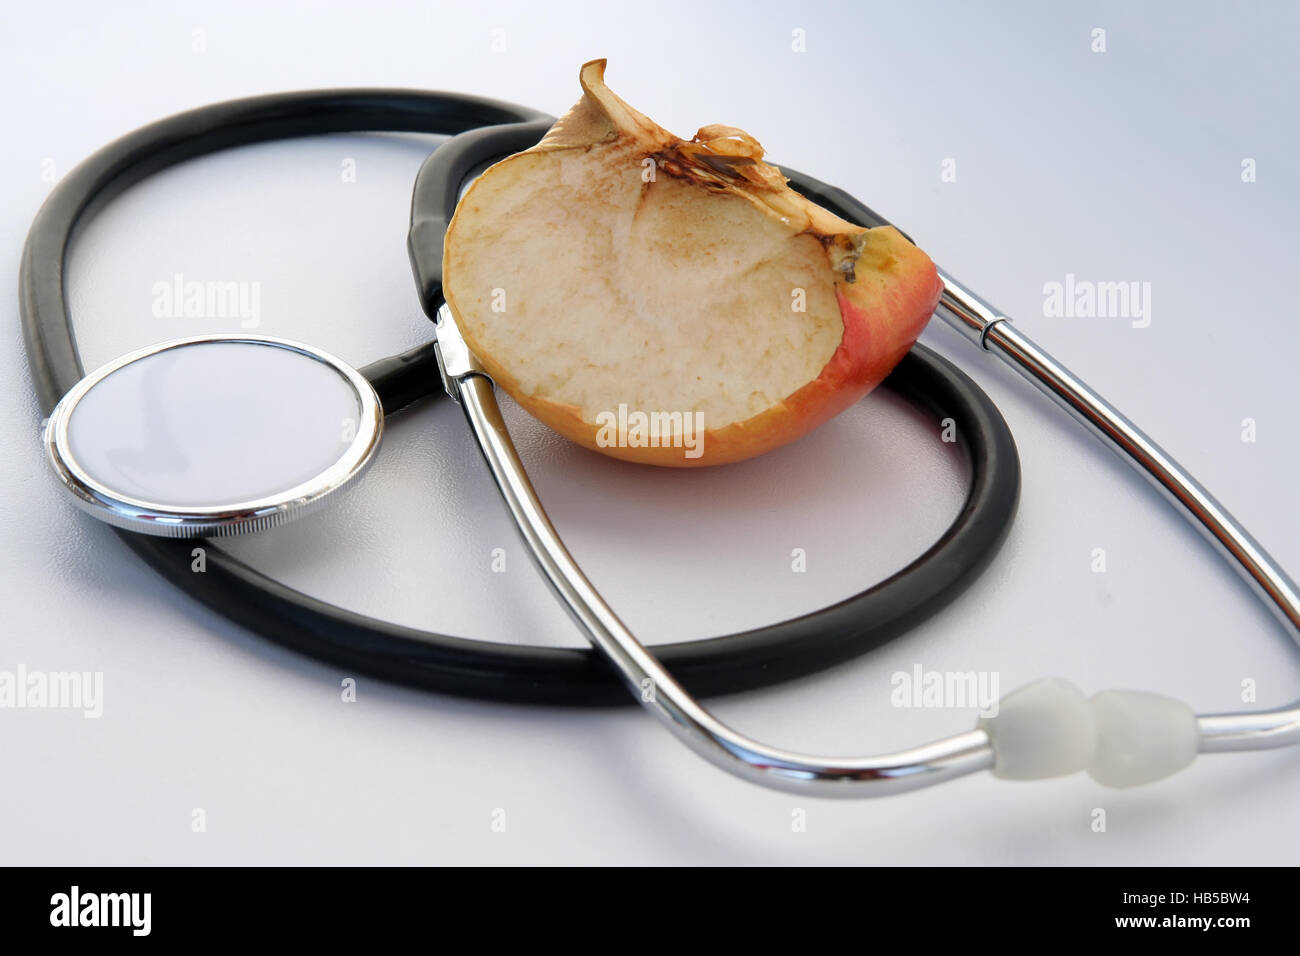 Medical tools. Medical stethoscope and a apple. Stock Photo